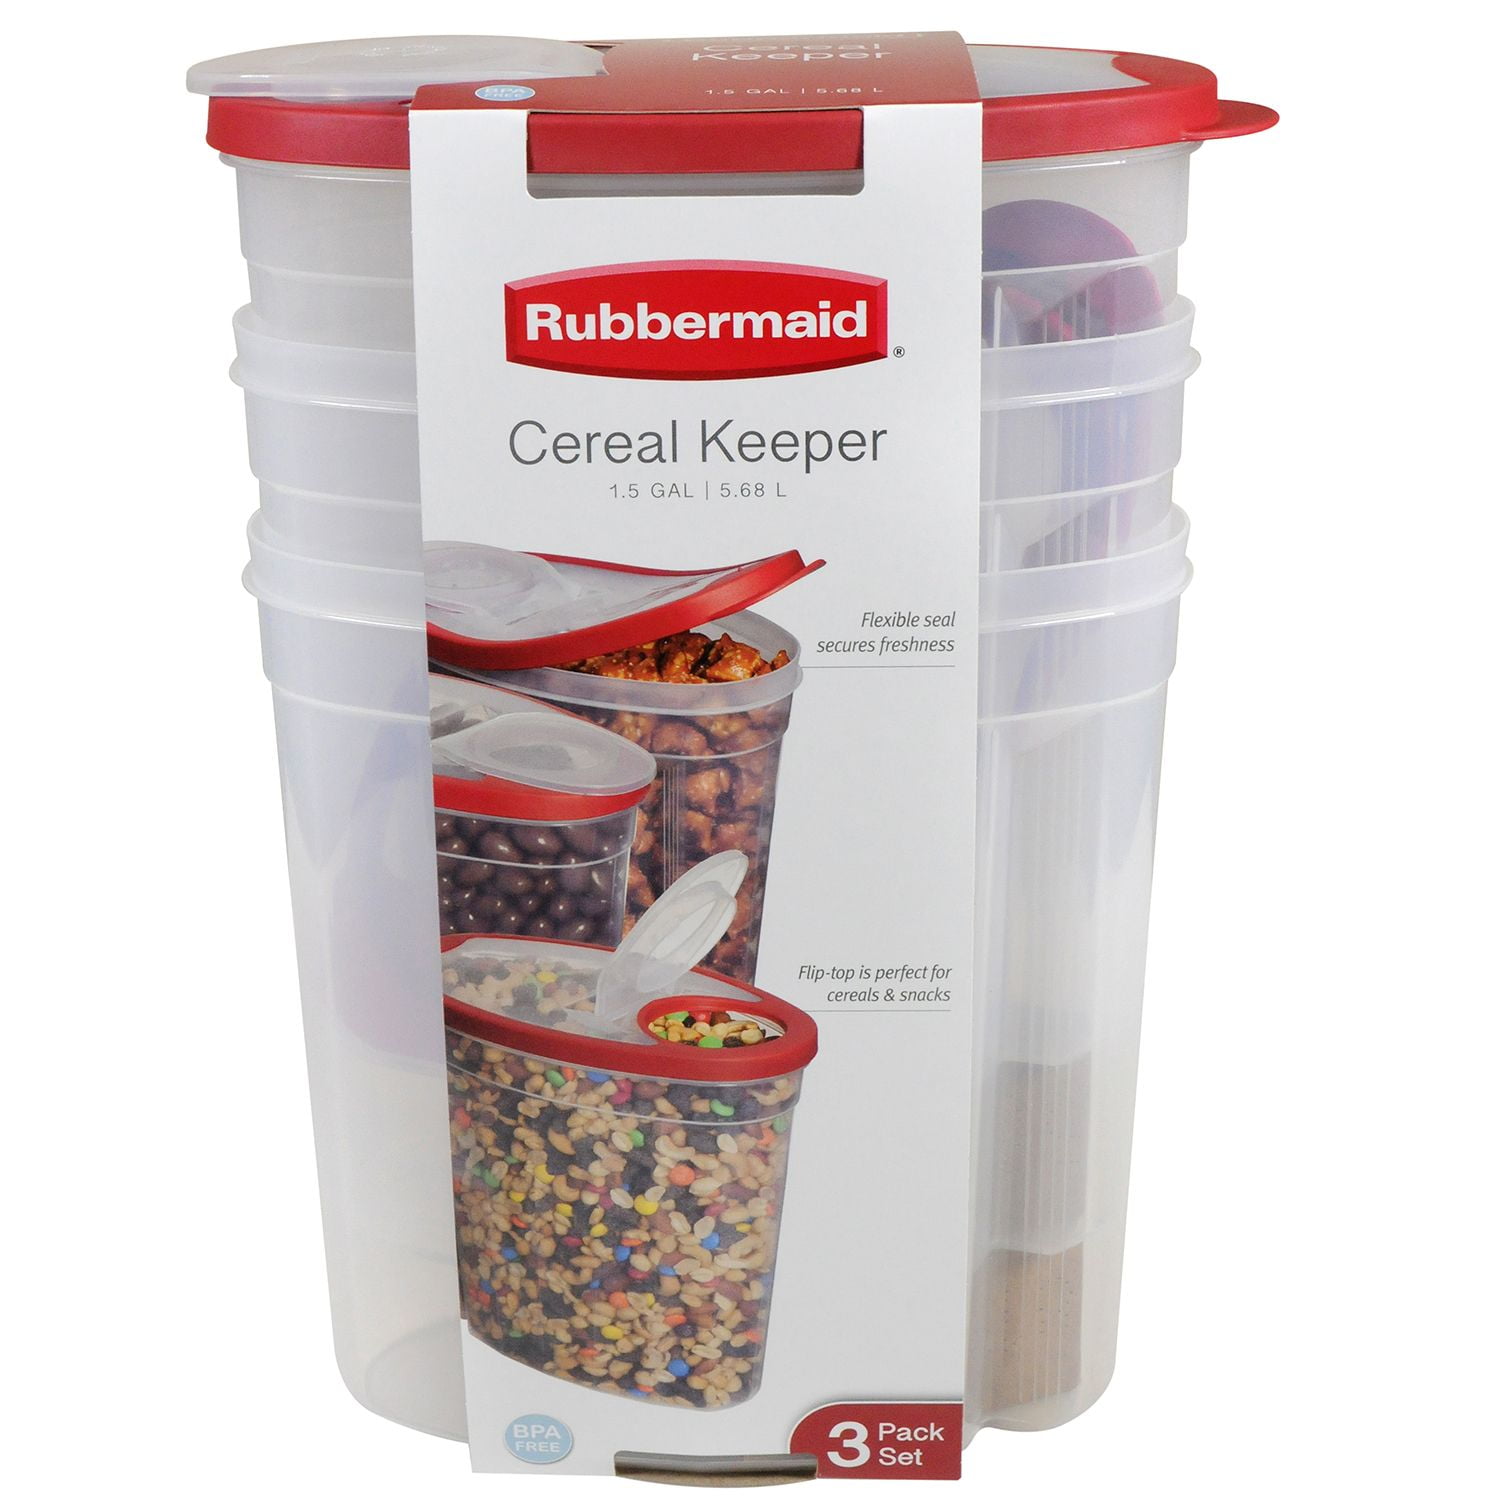 Rubbermaid Cereal Keeper 1.5-Gallon 